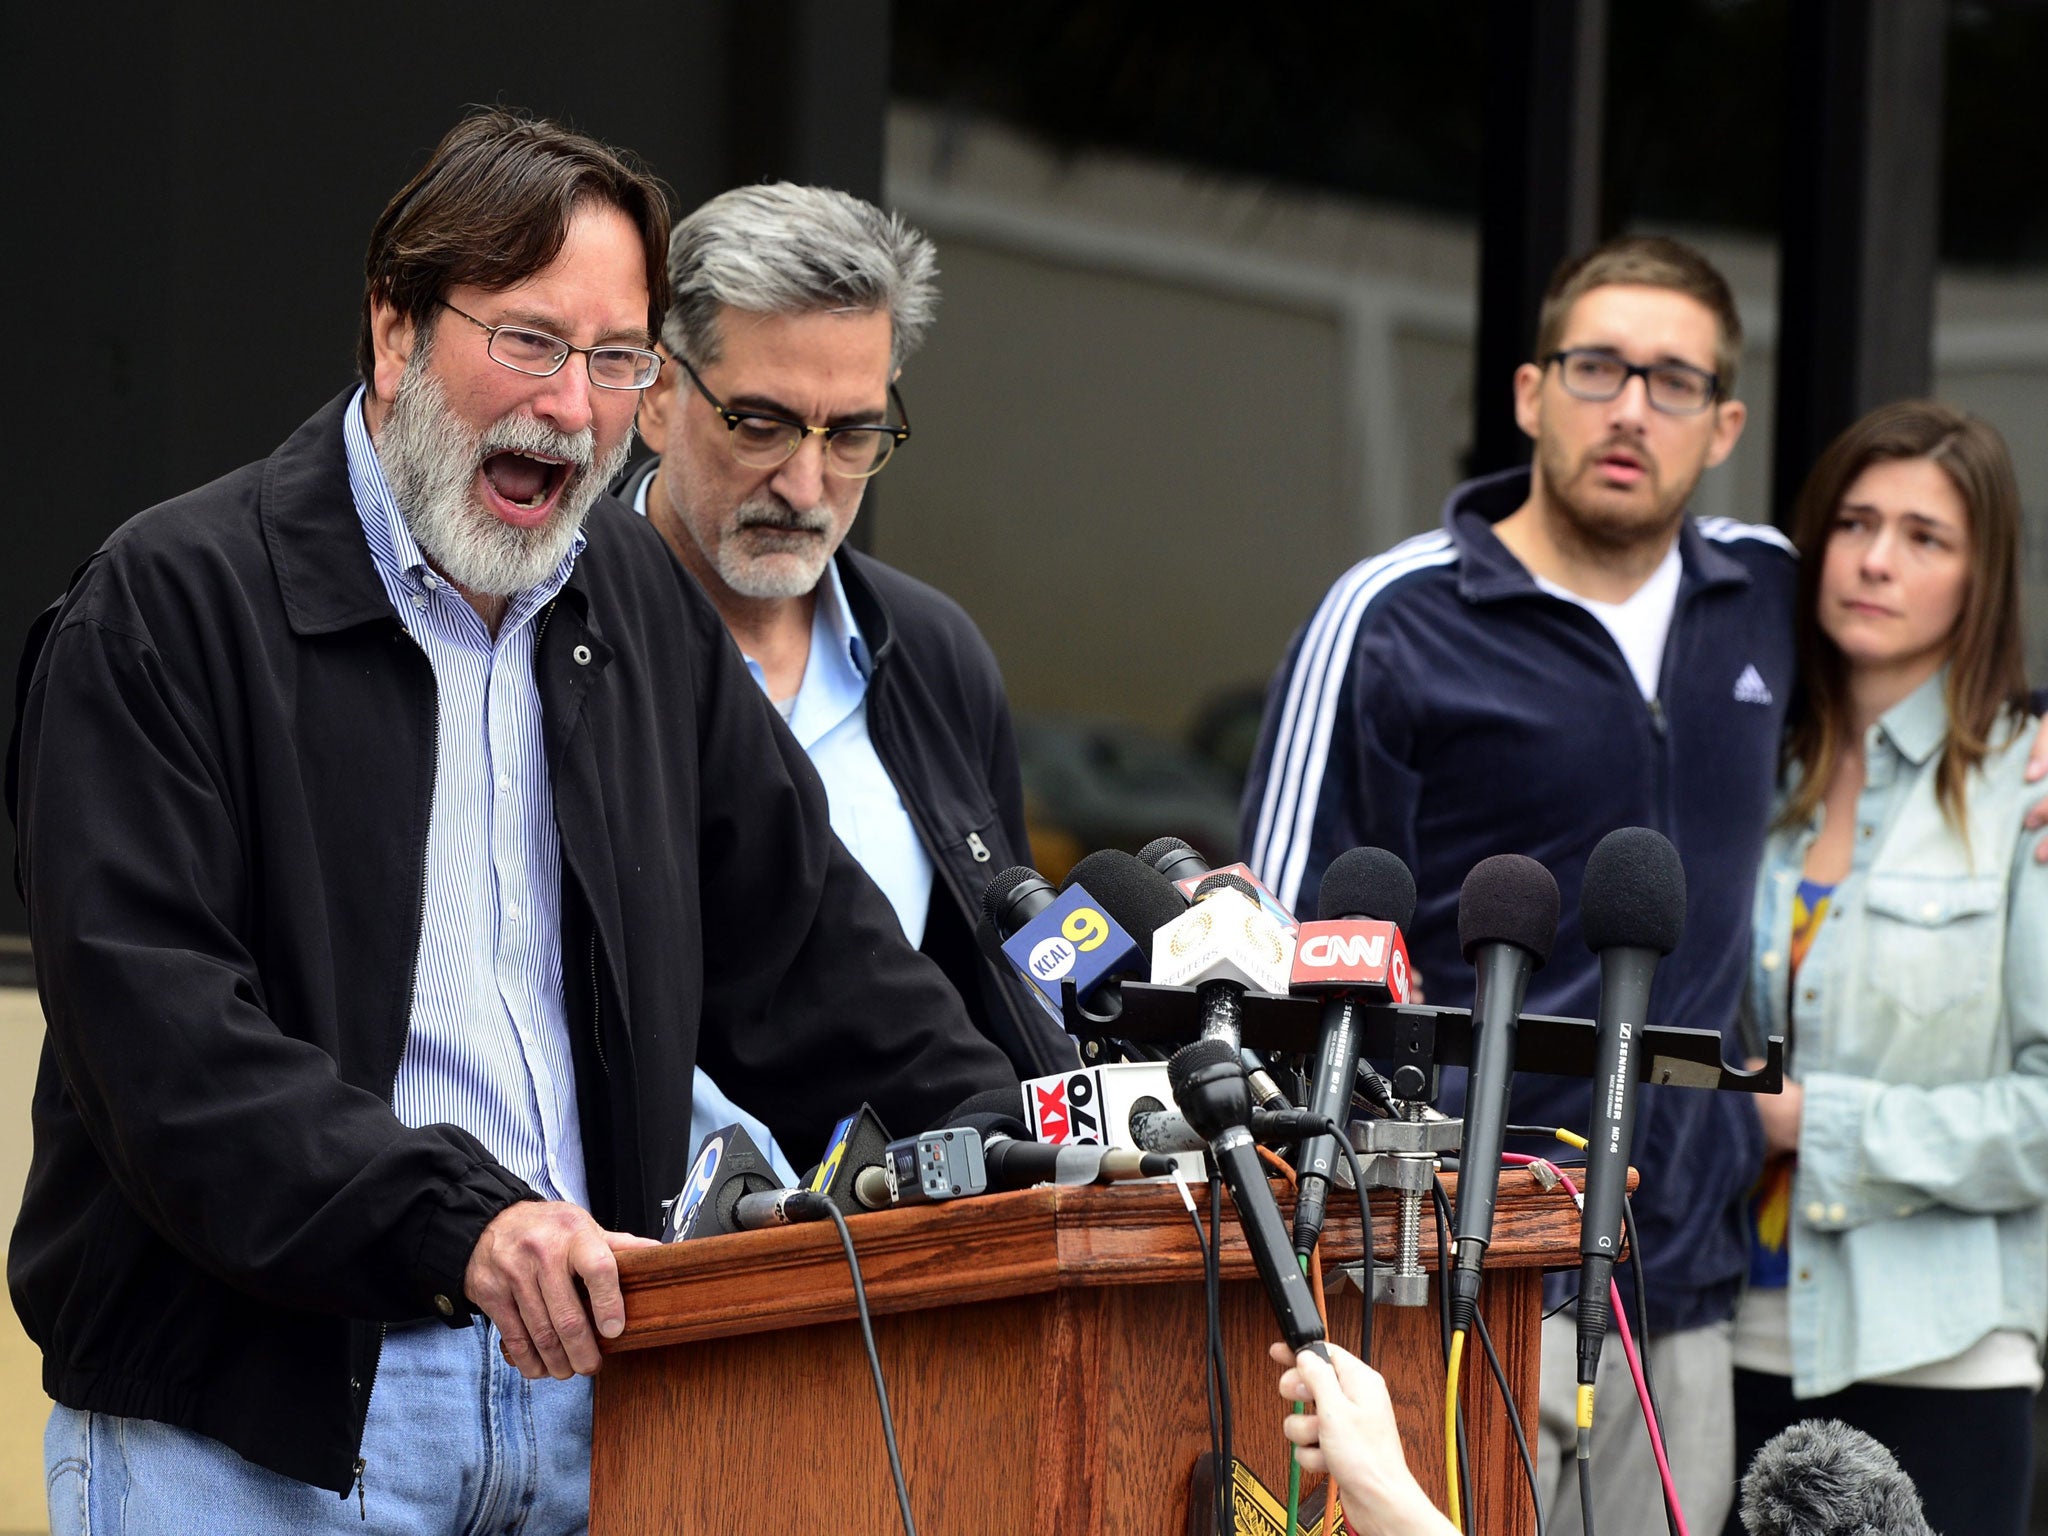 Richard Martinez, whose son was shot dead by Elliot Rogers, blames "craven, irresponsible politicians and the NRA" at a news conference.